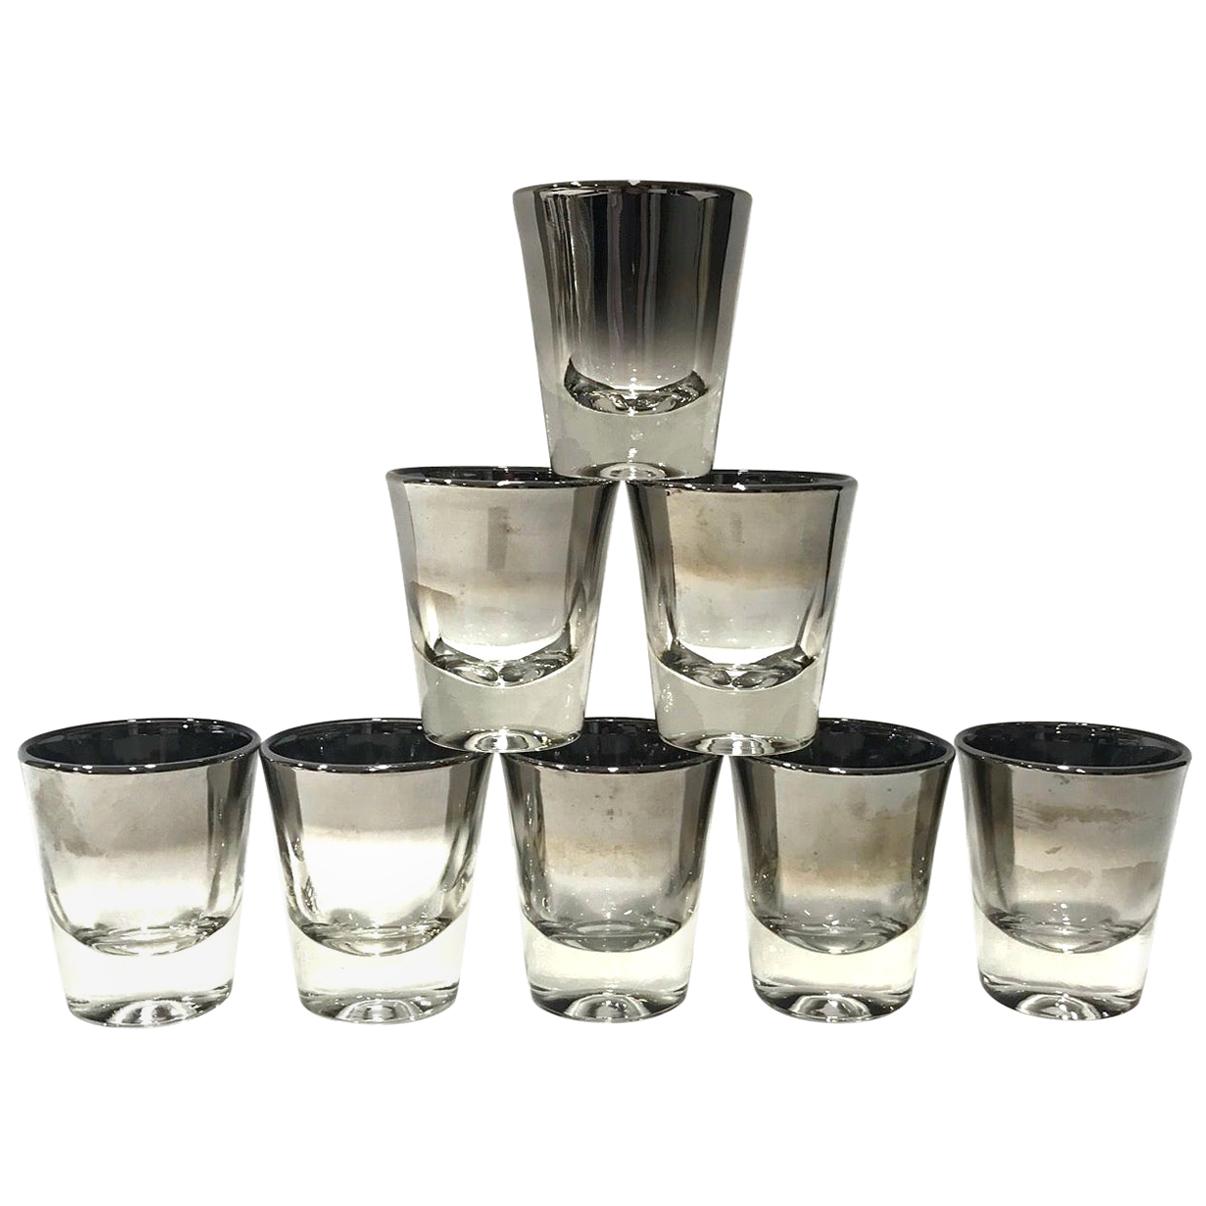 Set of Eight Dorothy Thorpe Barware Shot Glasses with Silver Overlay circa 1960s